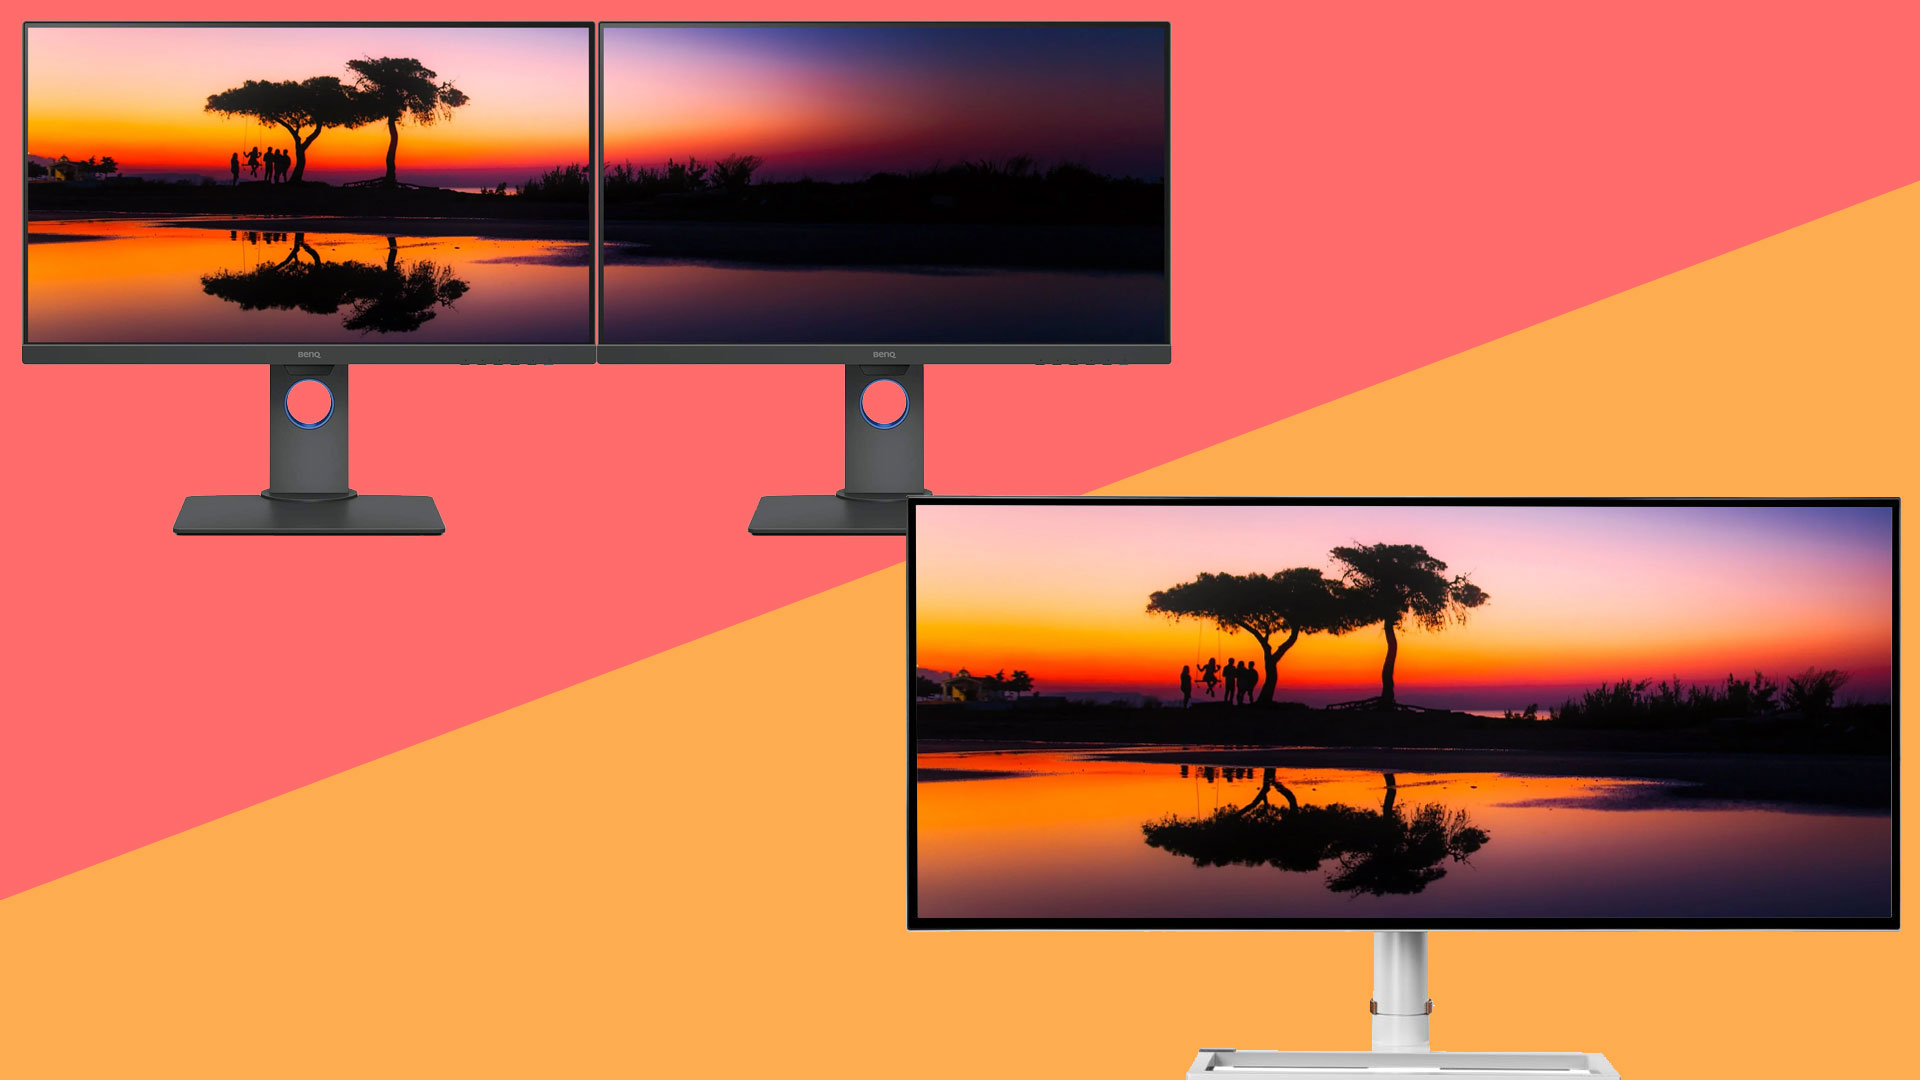 Ultrawide monitor or dual monitors: What's best? - Reviewed